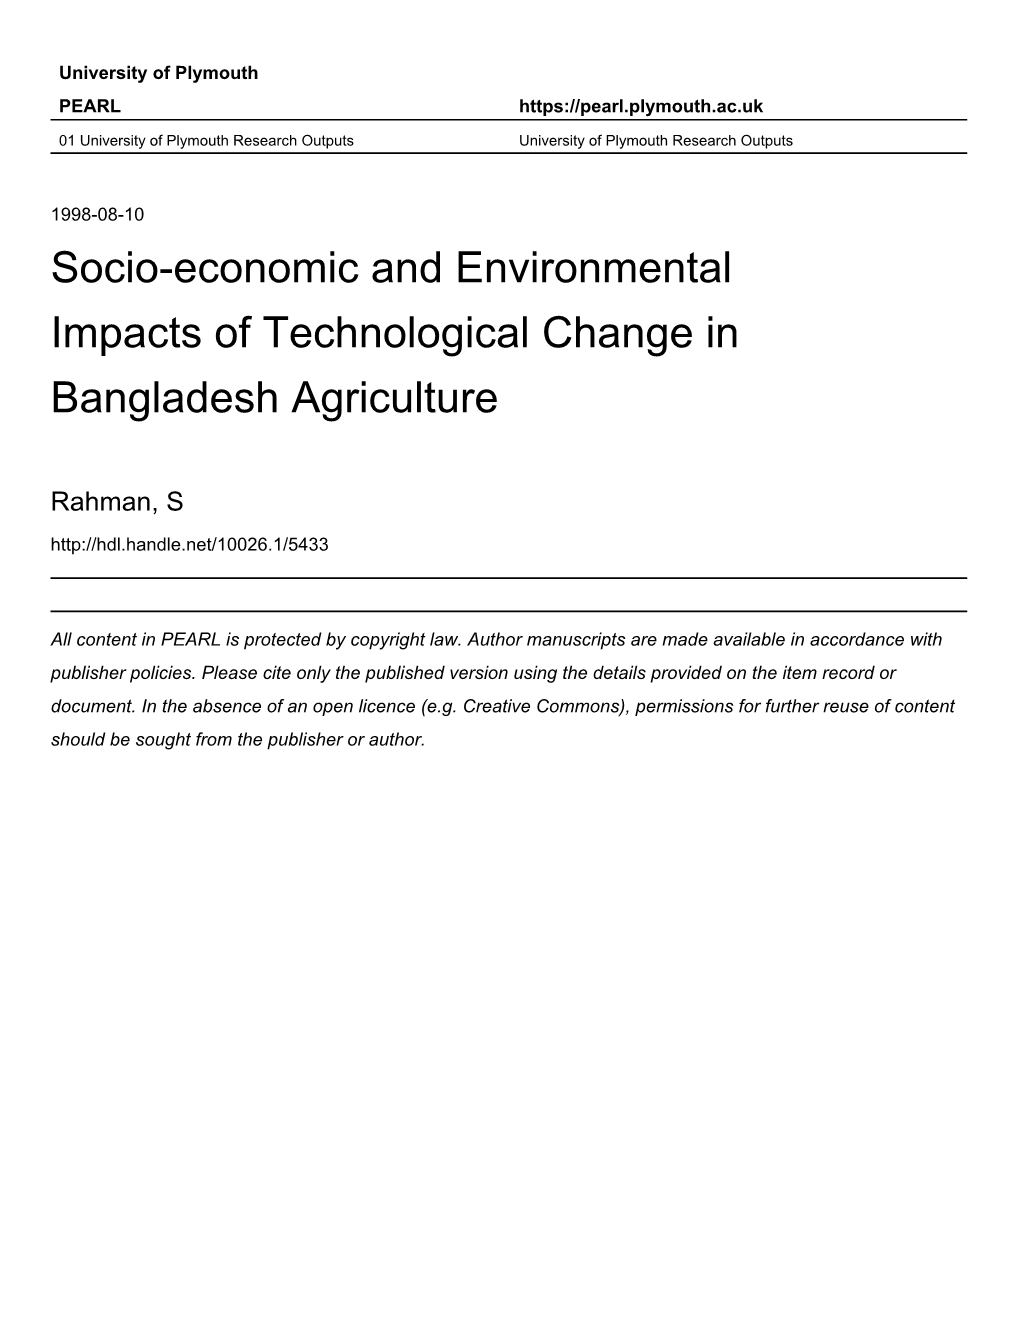 Socio-Economic and Environmental Impacts of Technological Change in Bangladesh Agriculture